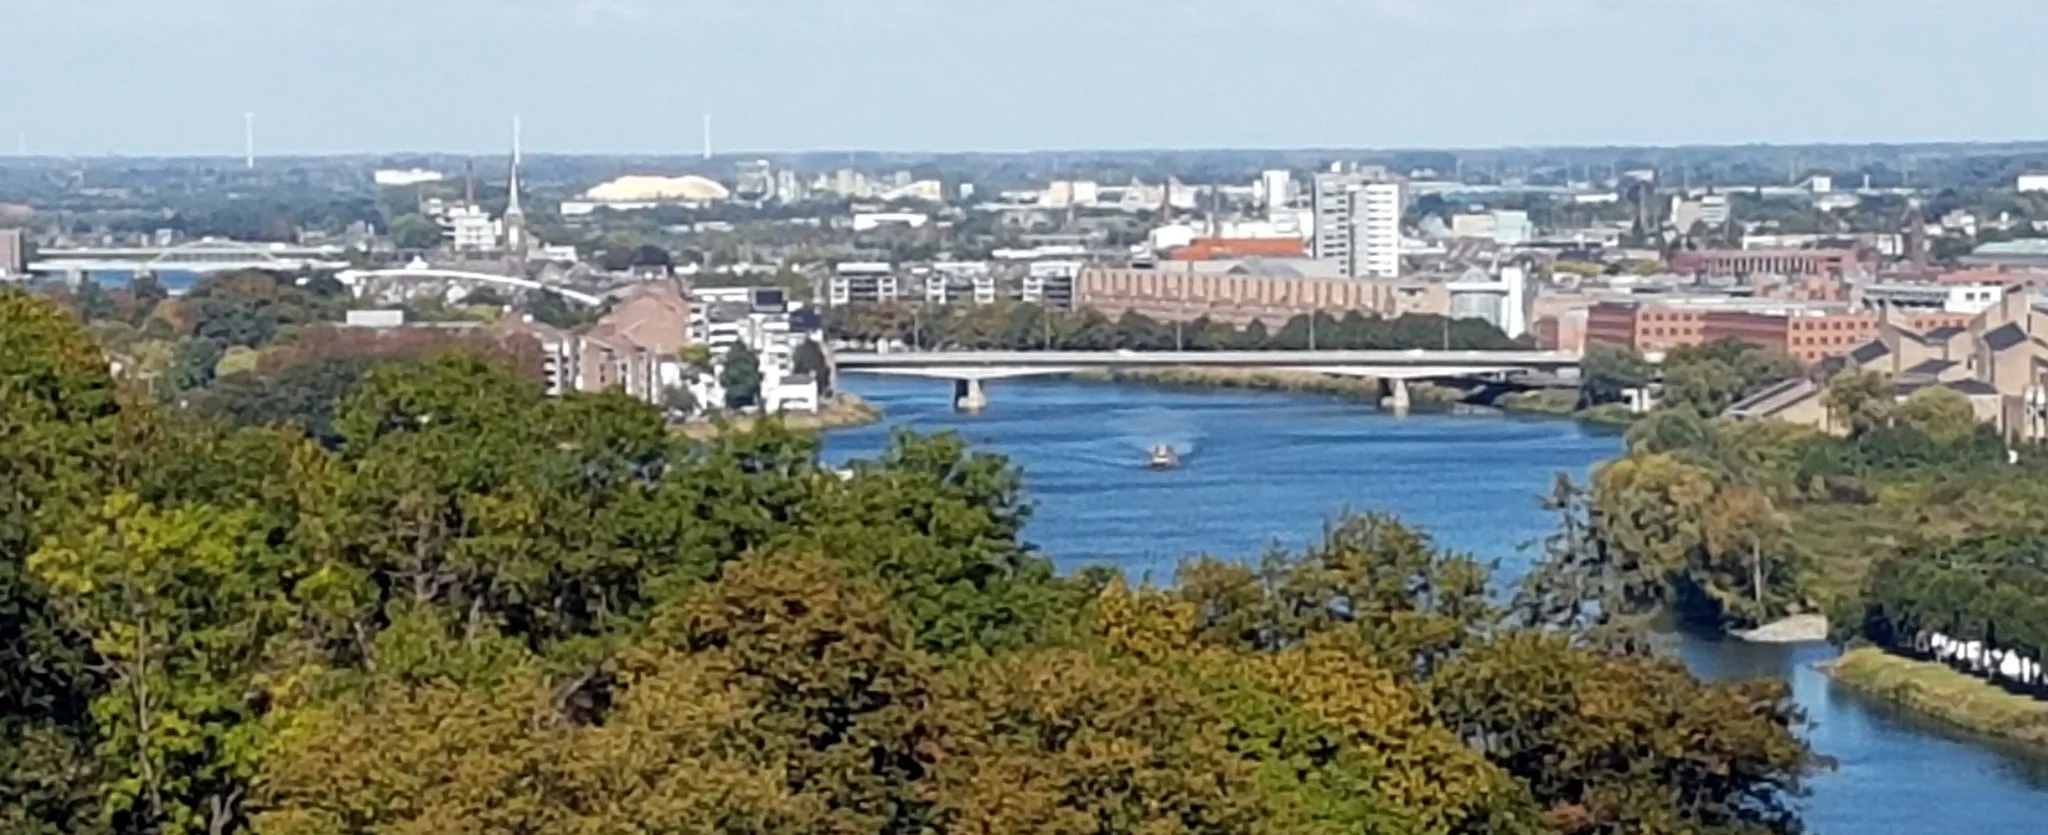 Photo showing: View towards the north from the ruined keep of Lichtenberg Castle on Mount Saint Peter in Maastricht, the Netherlands. In the foreground the river Meuse and Kennedy Bridge. In the background the eastern quarters and suburbs of Maastricht.